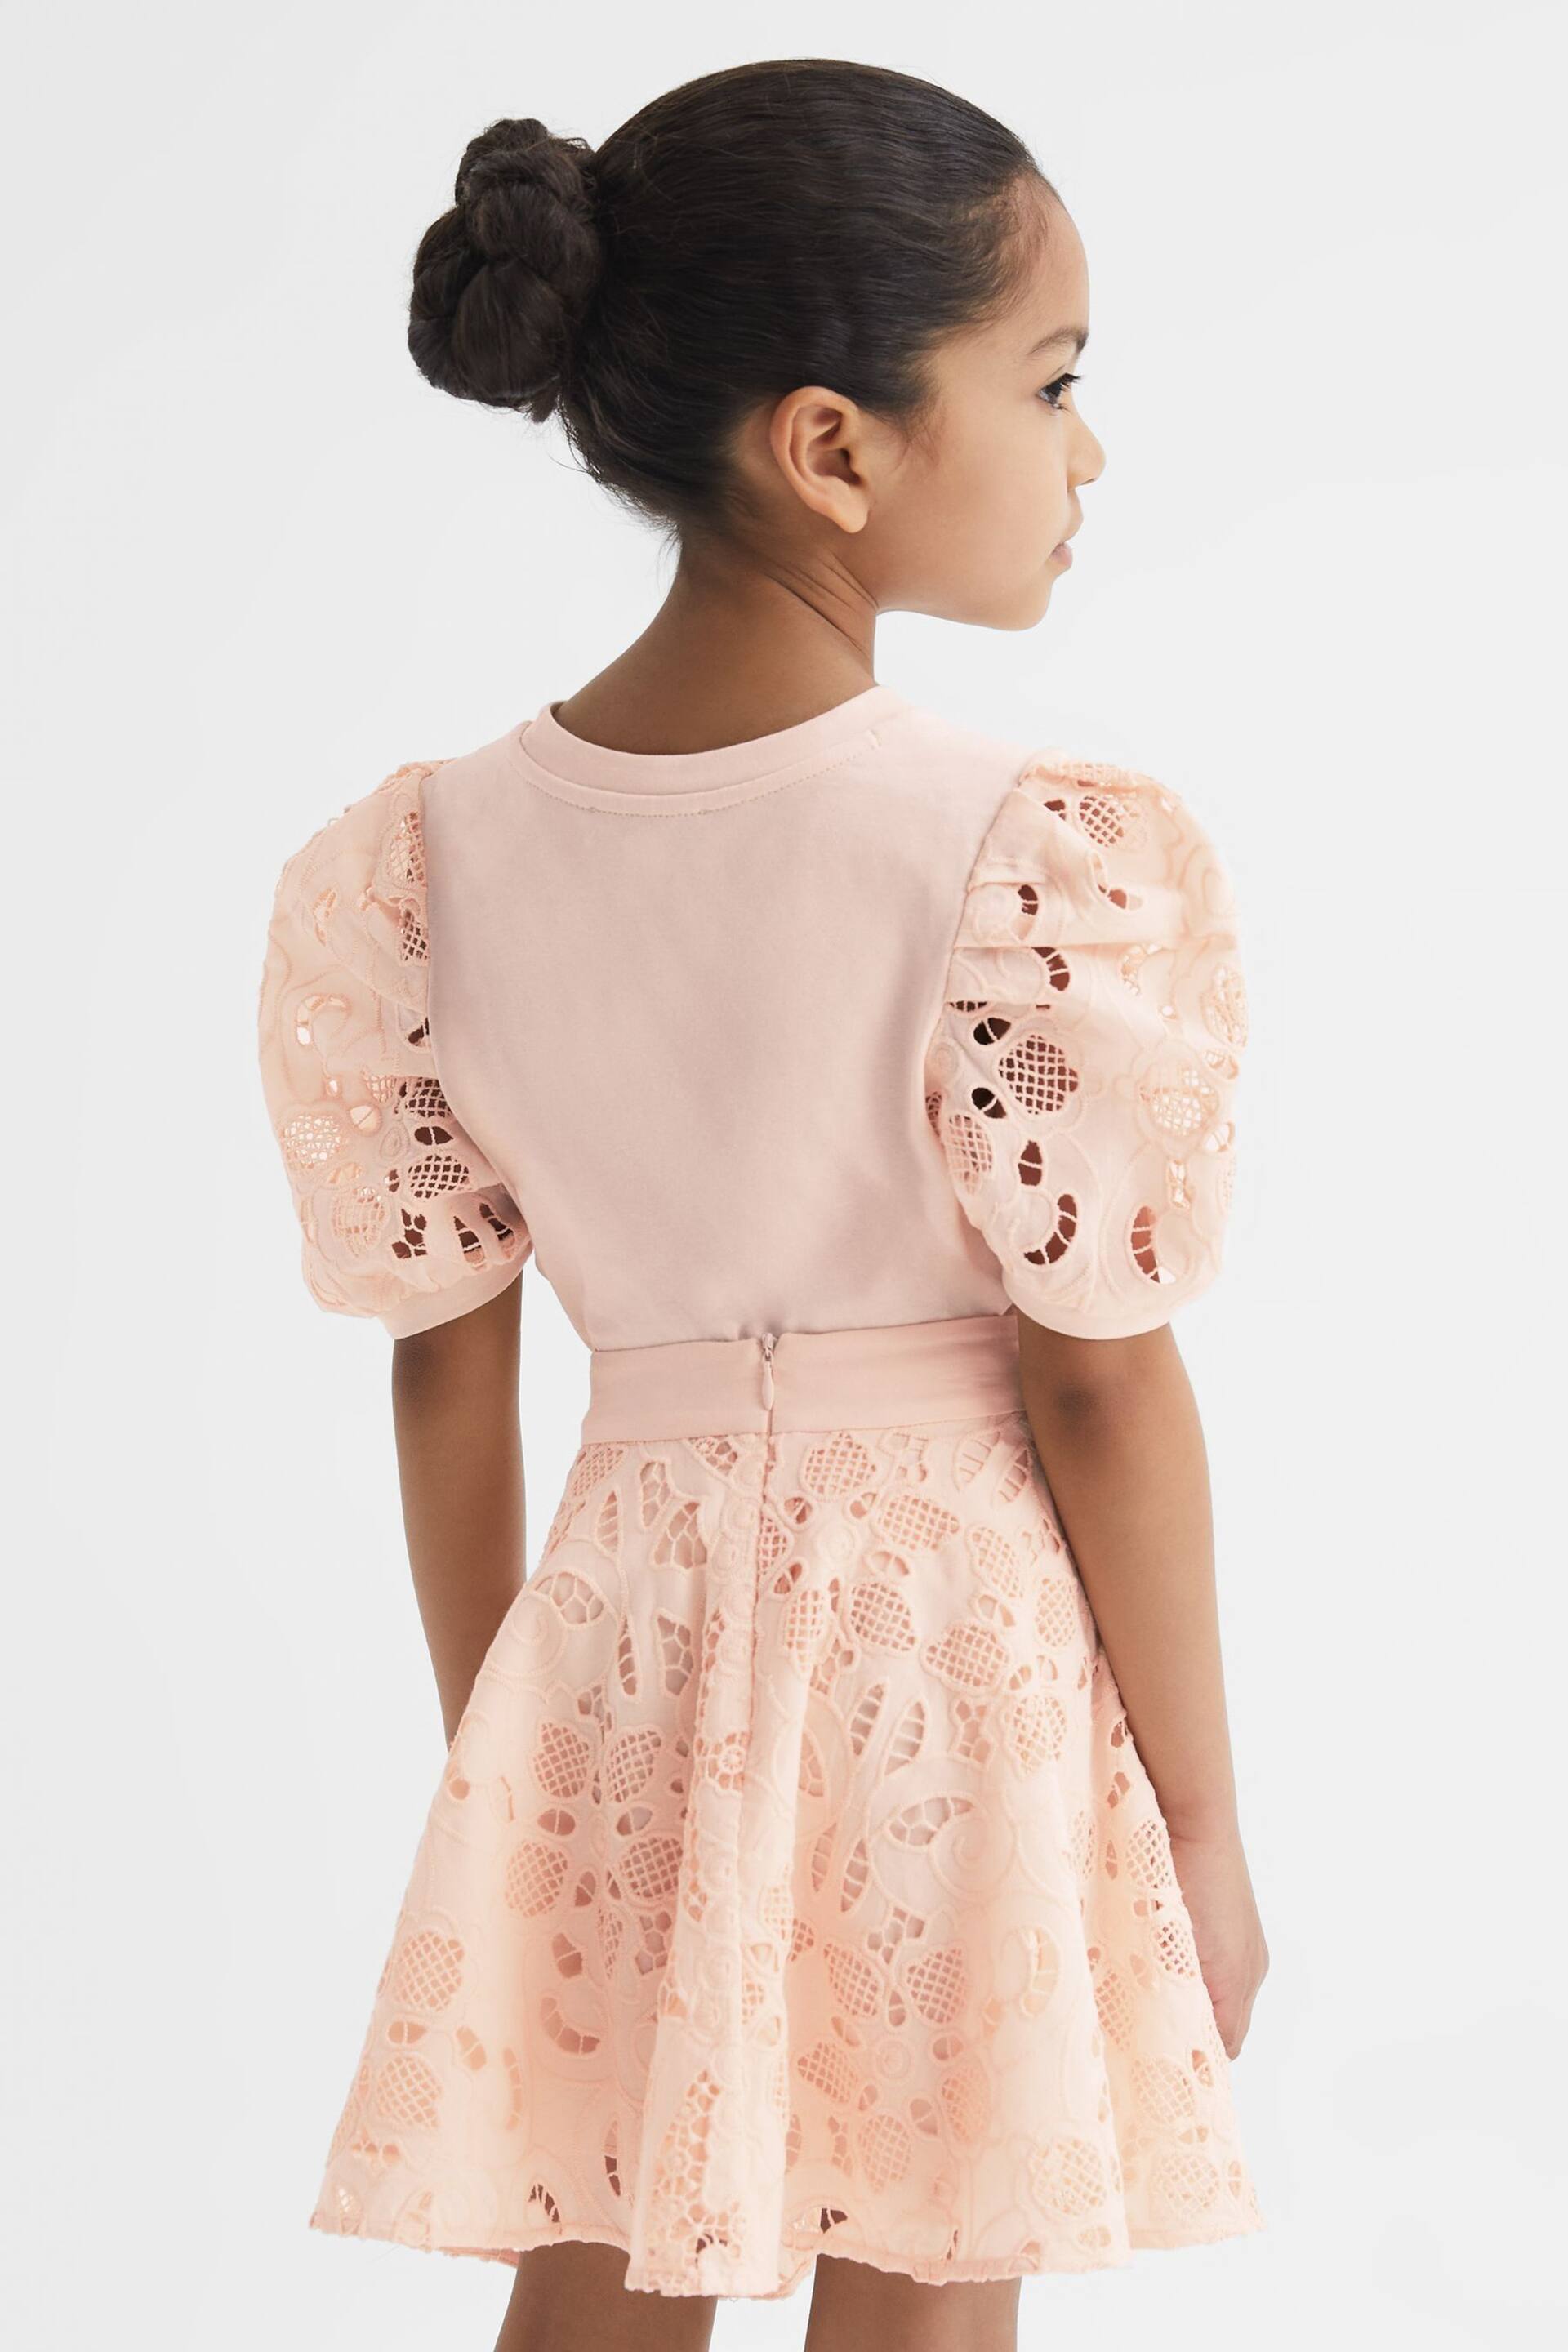 Reiss Pink Alberta Junior Floral Lace Puff Sleeve T-Shirt - Image 5 of 6